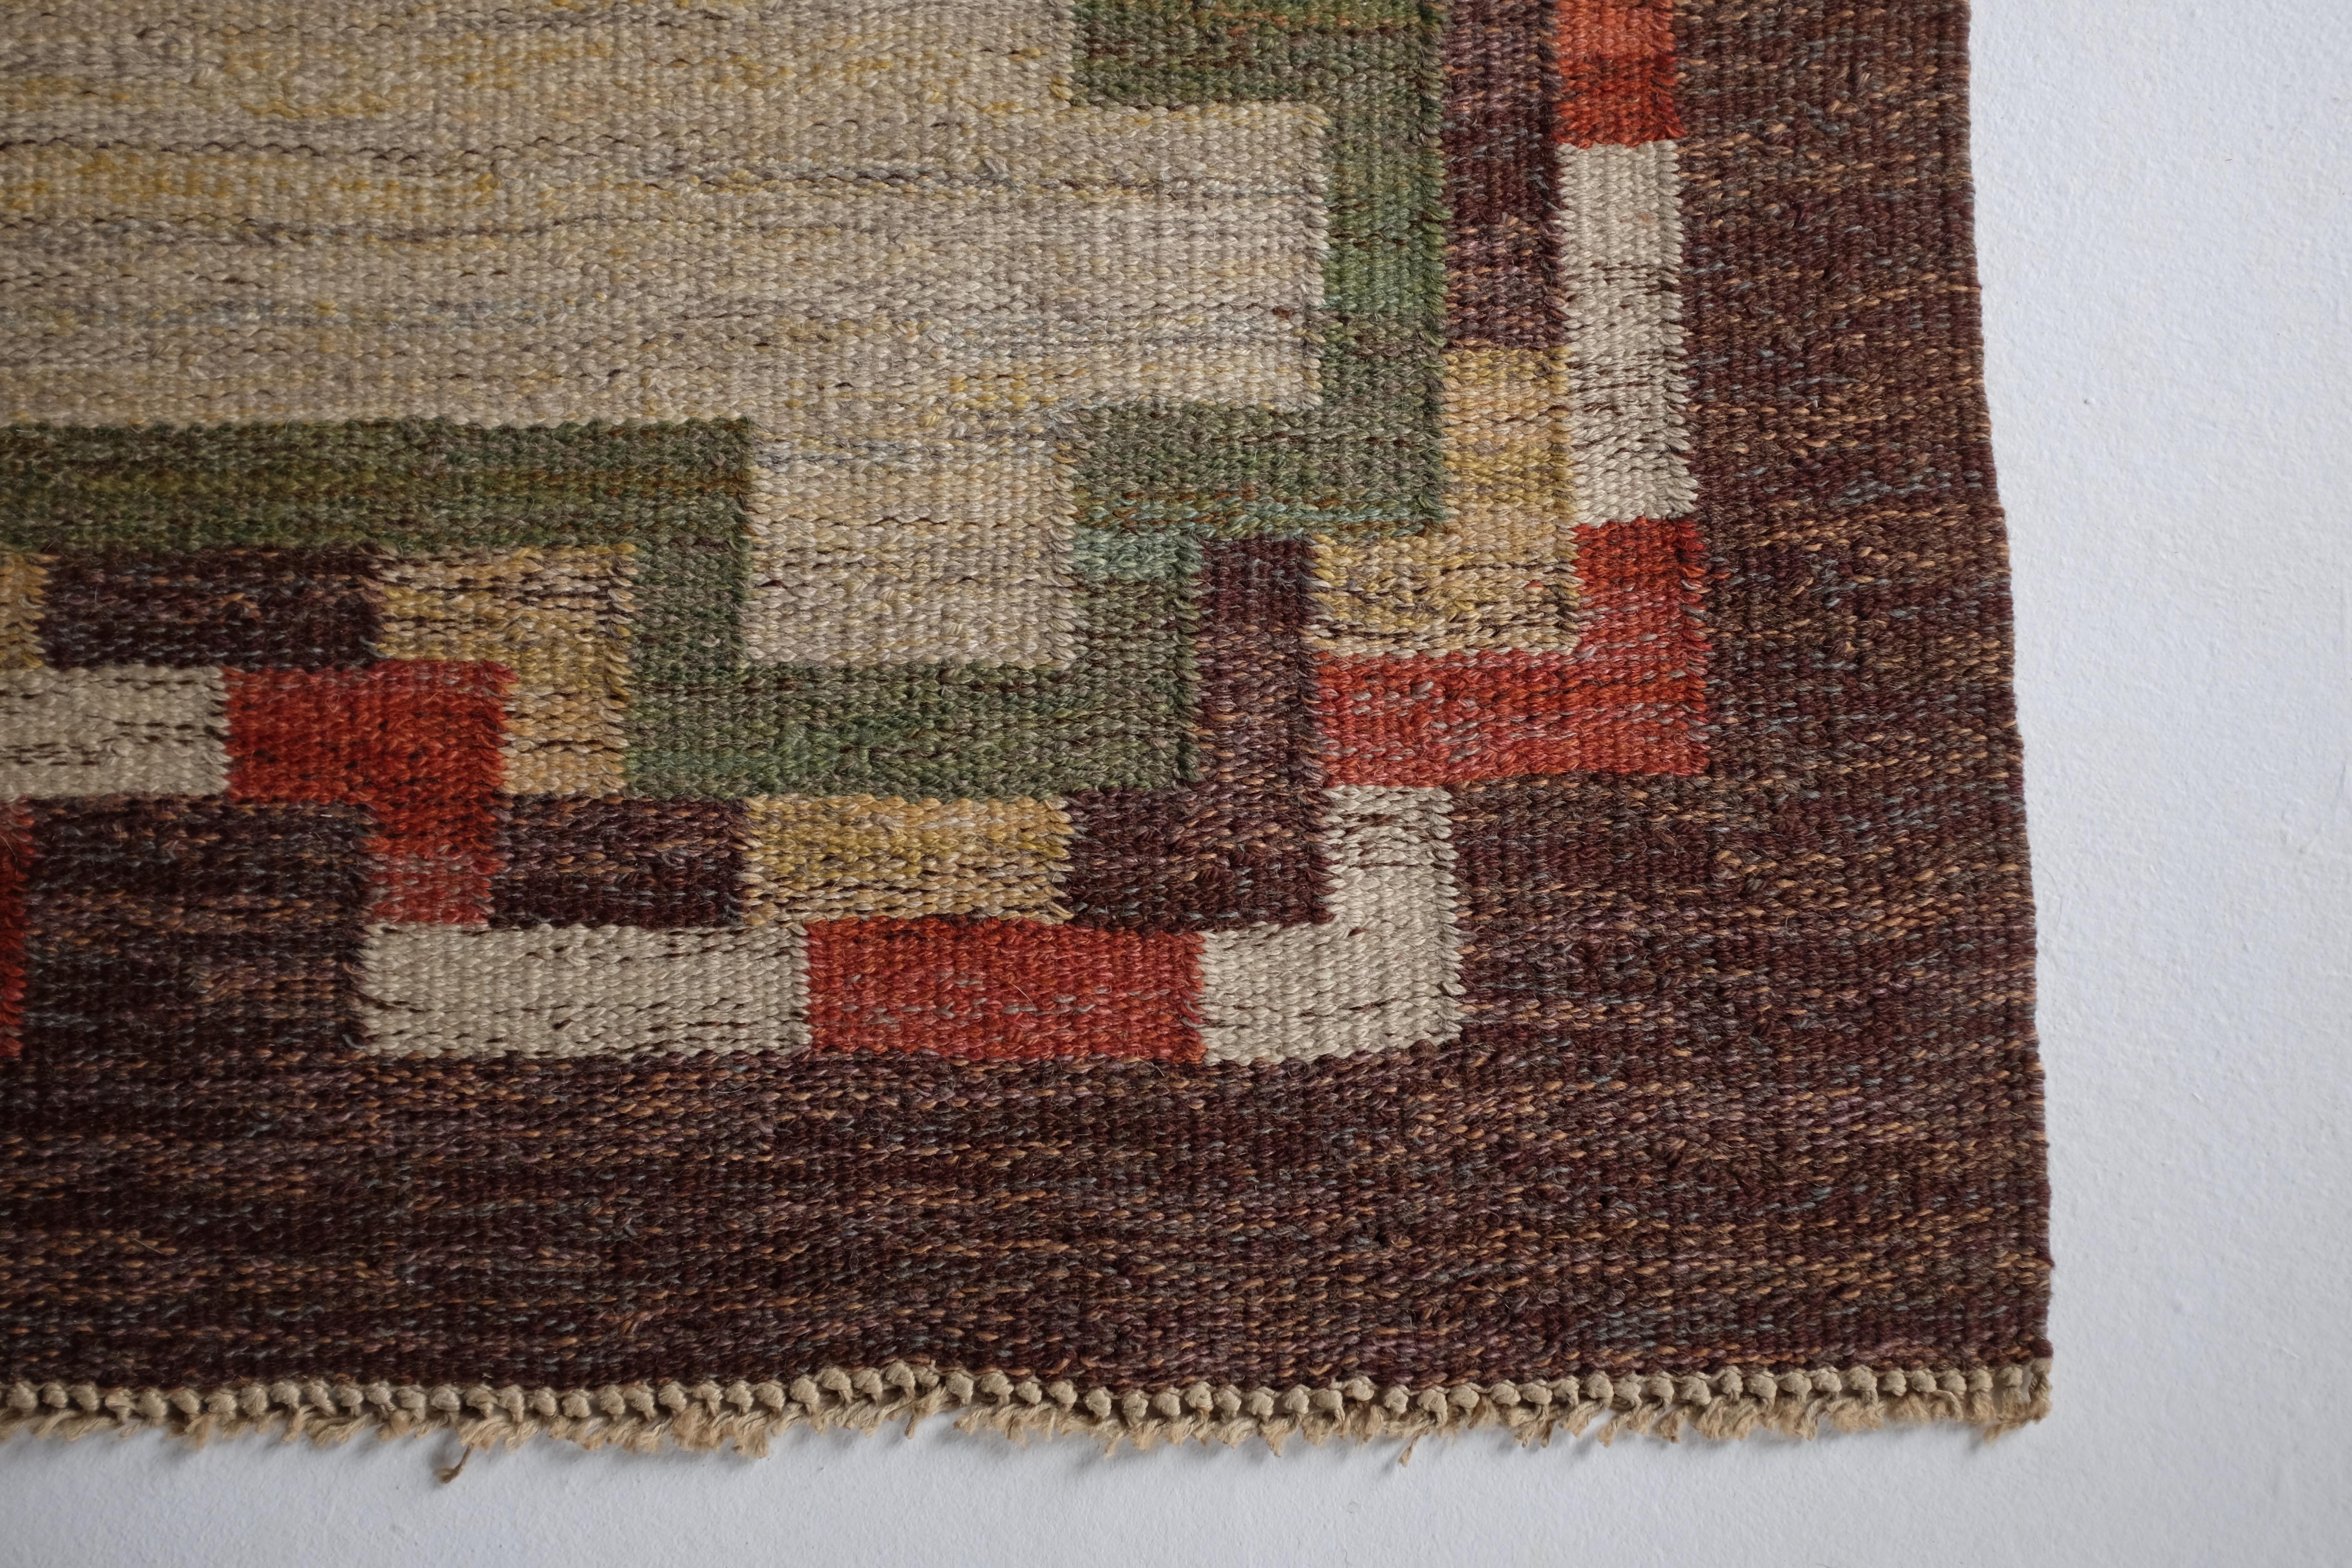 Large Vintage Swedish Kilim Rug In Good Condition For Sale In Brooklyn, NY